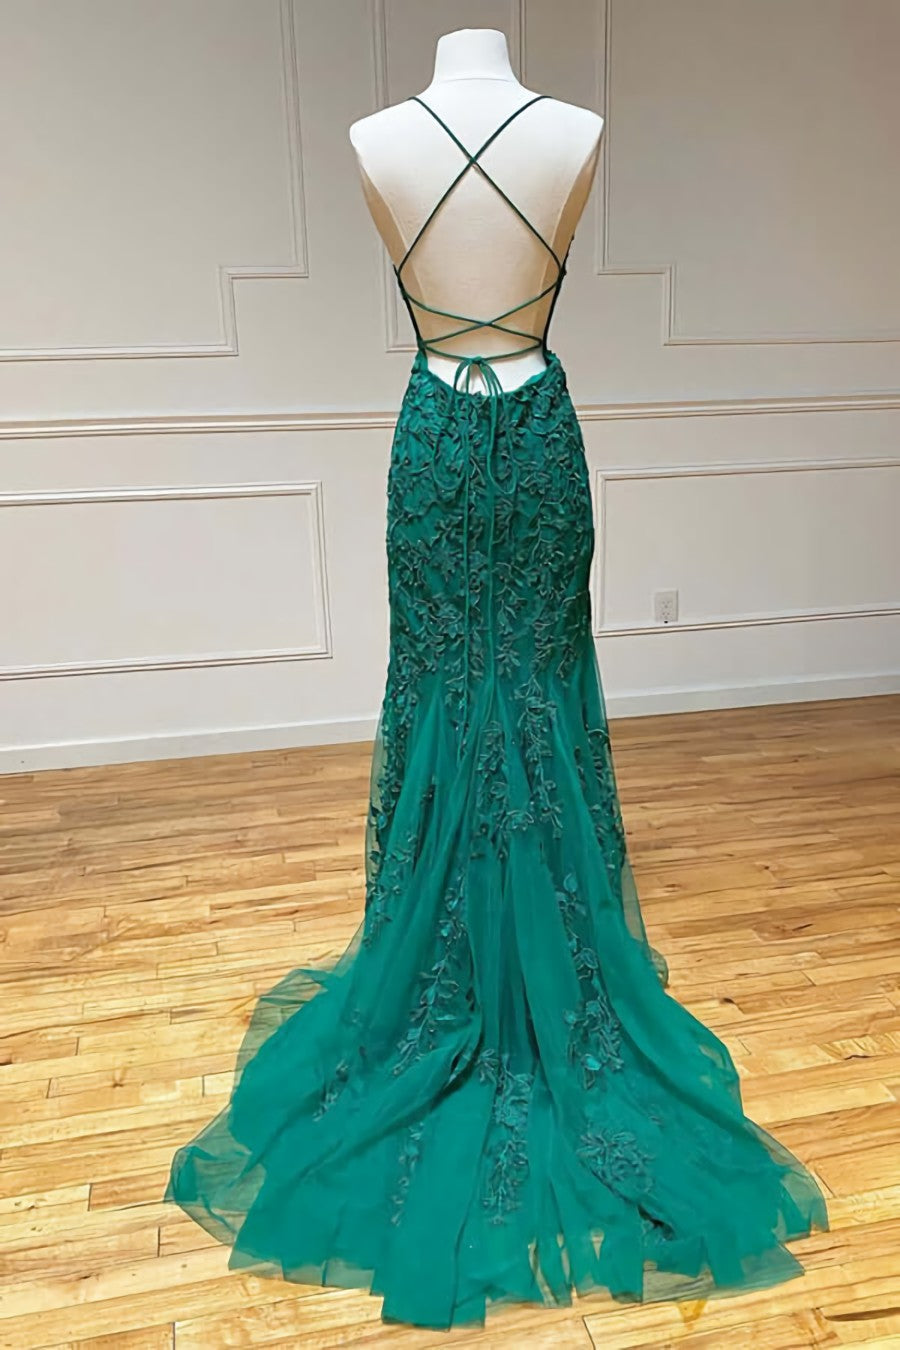 Bridesmaides Dresses Summer, Green Lace Mermaid Backless Spaghetti Straps Prom Dresses, Evening Gown,maxi dresses